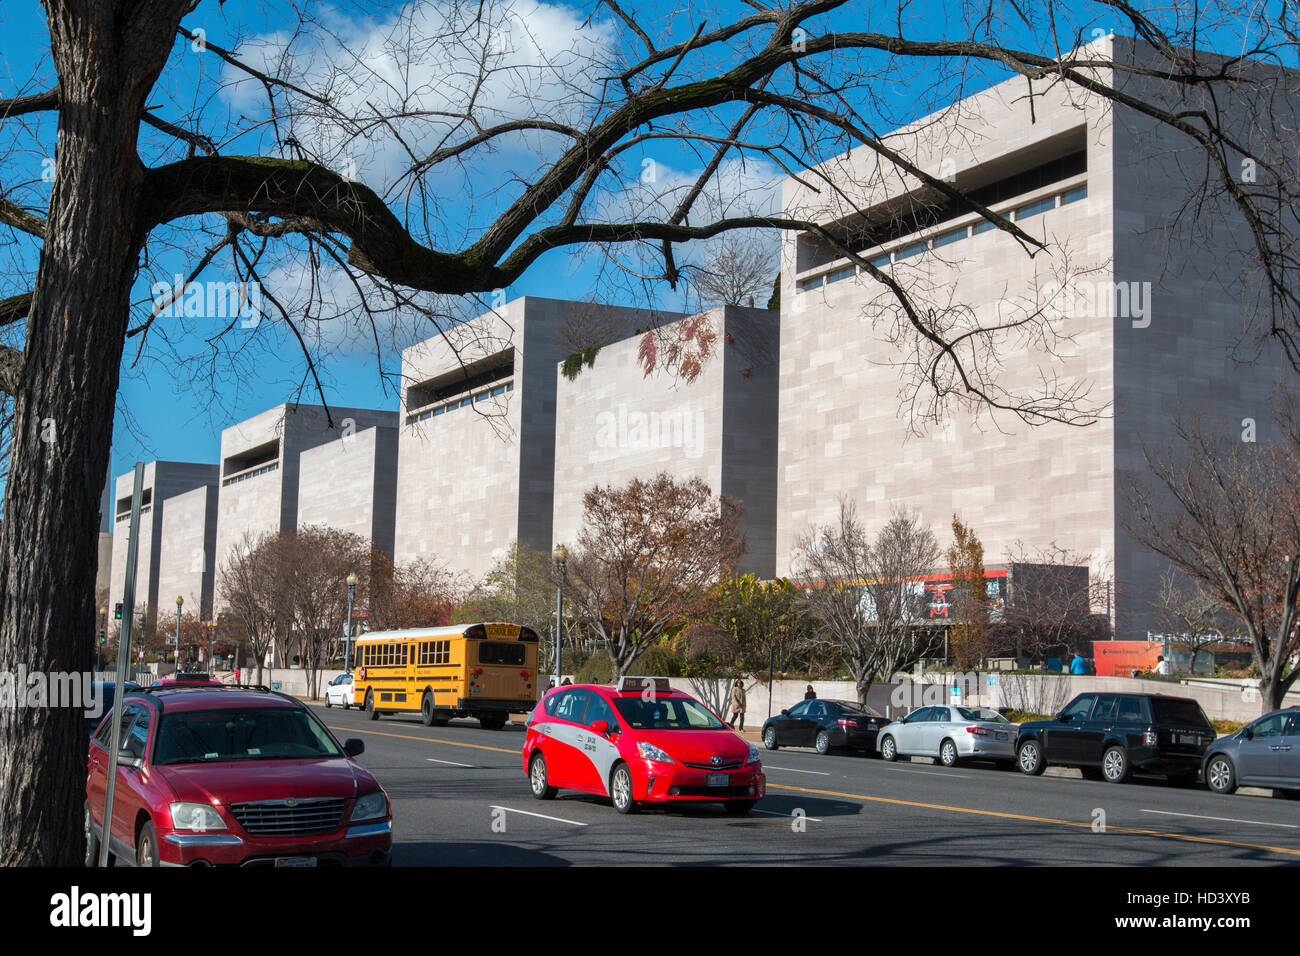 National Air and Space Museum in Washington, DC Stockfoto